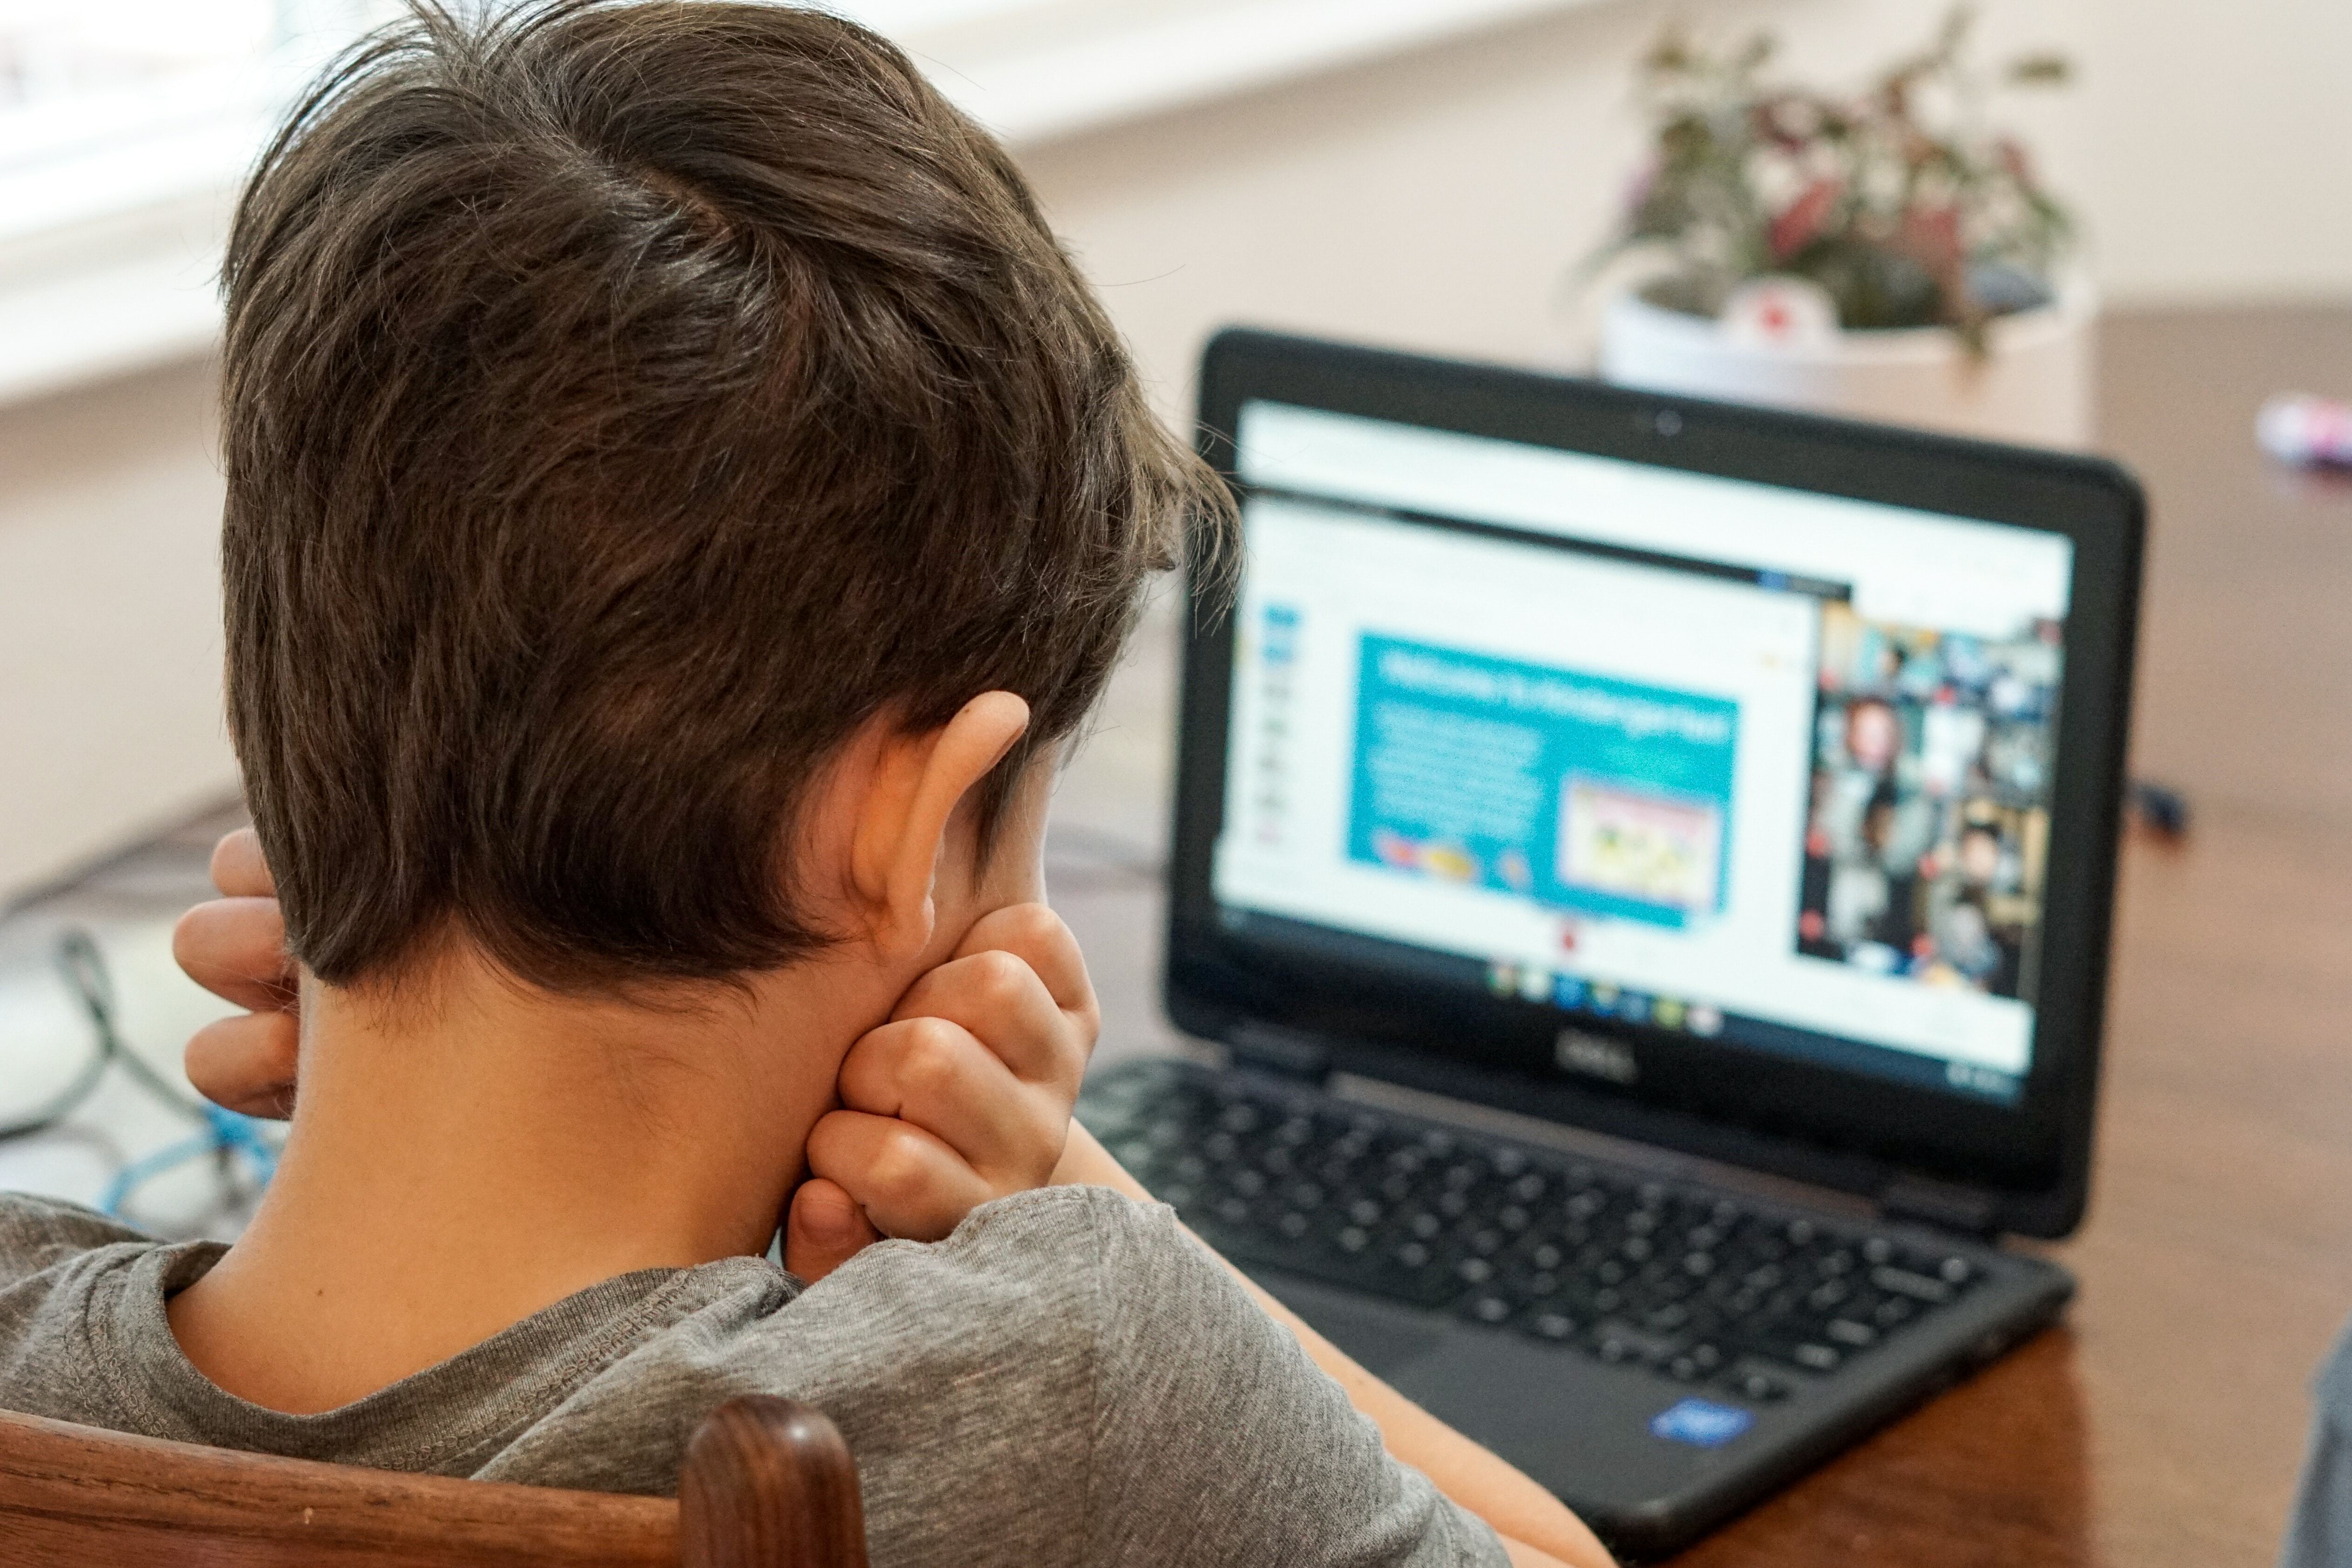 A child attending an online class with many other students.